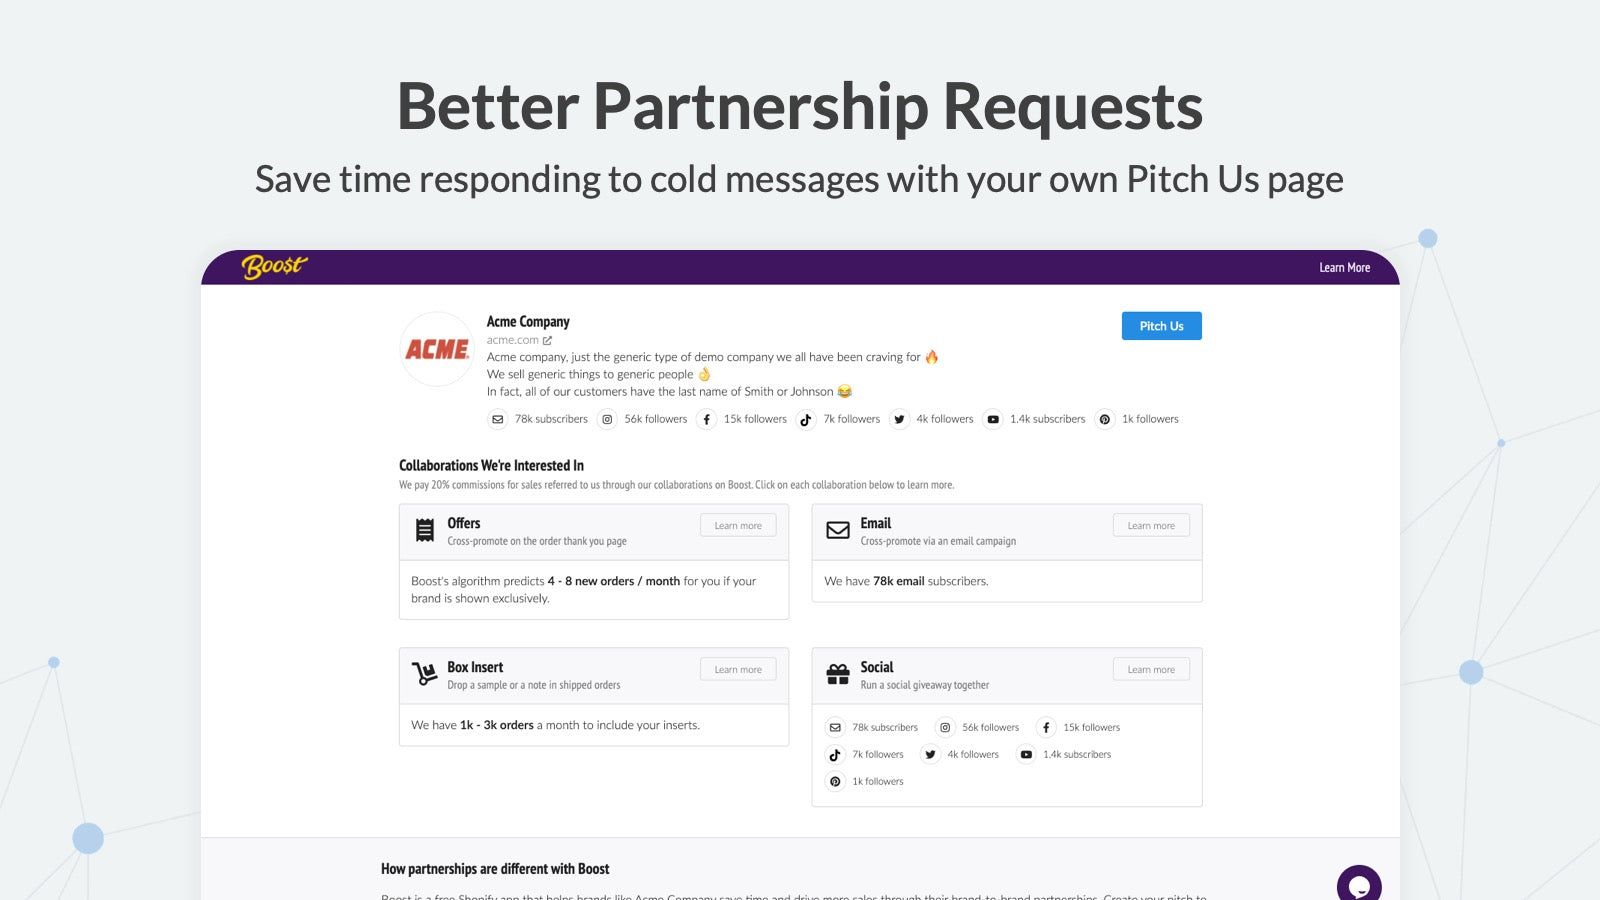 Save time responding to cold messages with your Pitch Us page